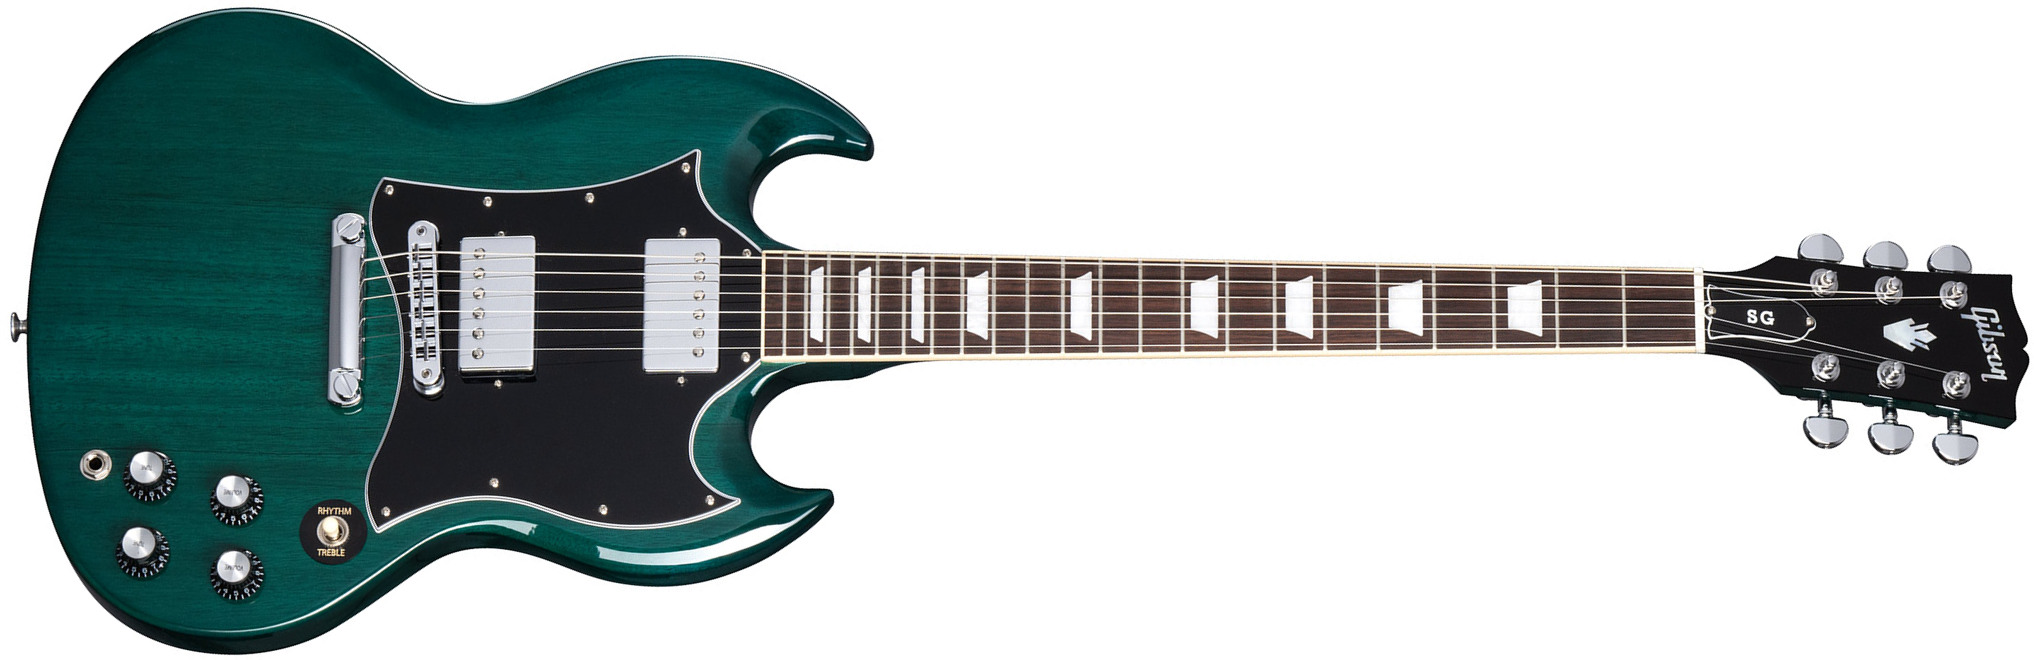 Gibson Sg Standard Custom Color 2h Ht Rw - Translucent Teal - Double cut electric guitar - Main picture